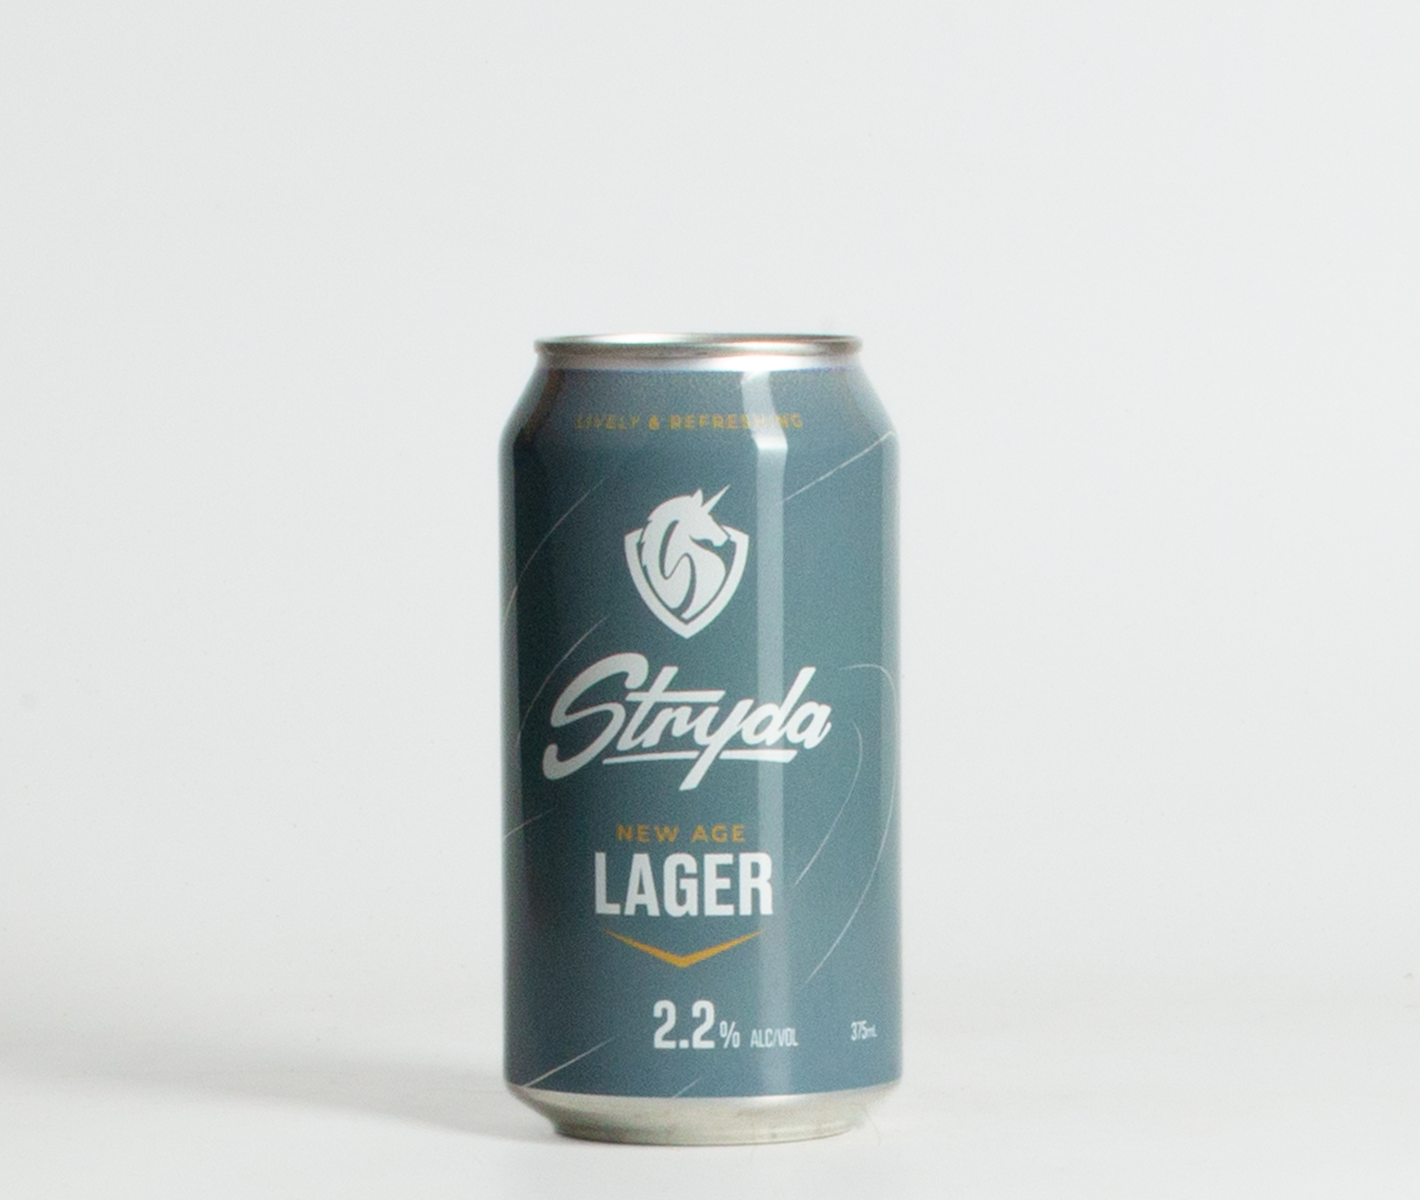 New Age Lager (375ml)